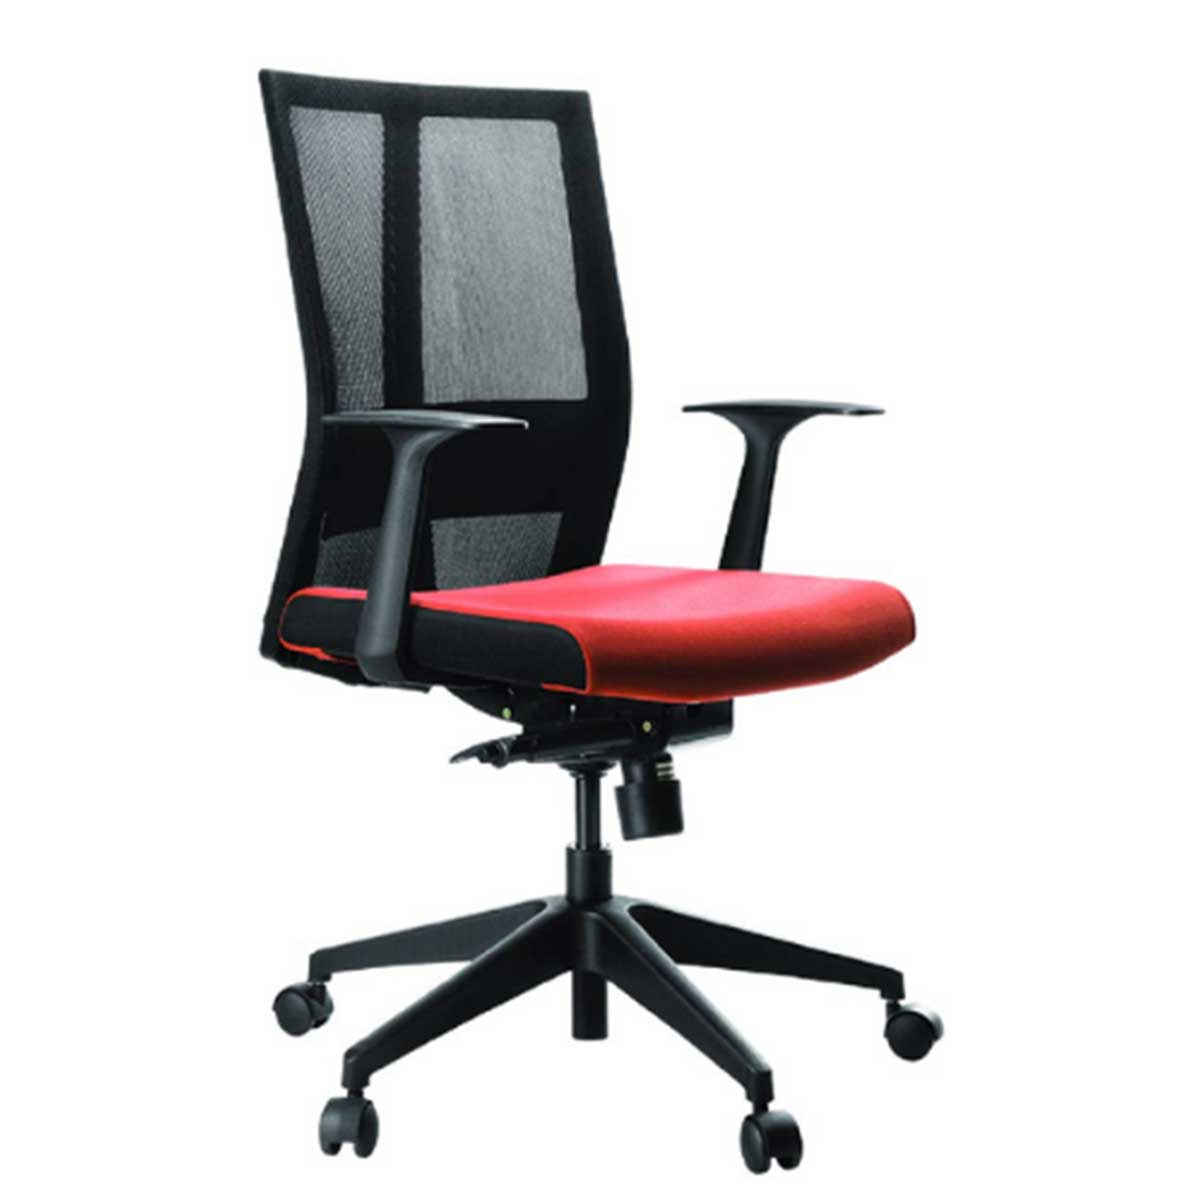 Conference Chair Manufacturers, Suppliers in Rohini Sector 14